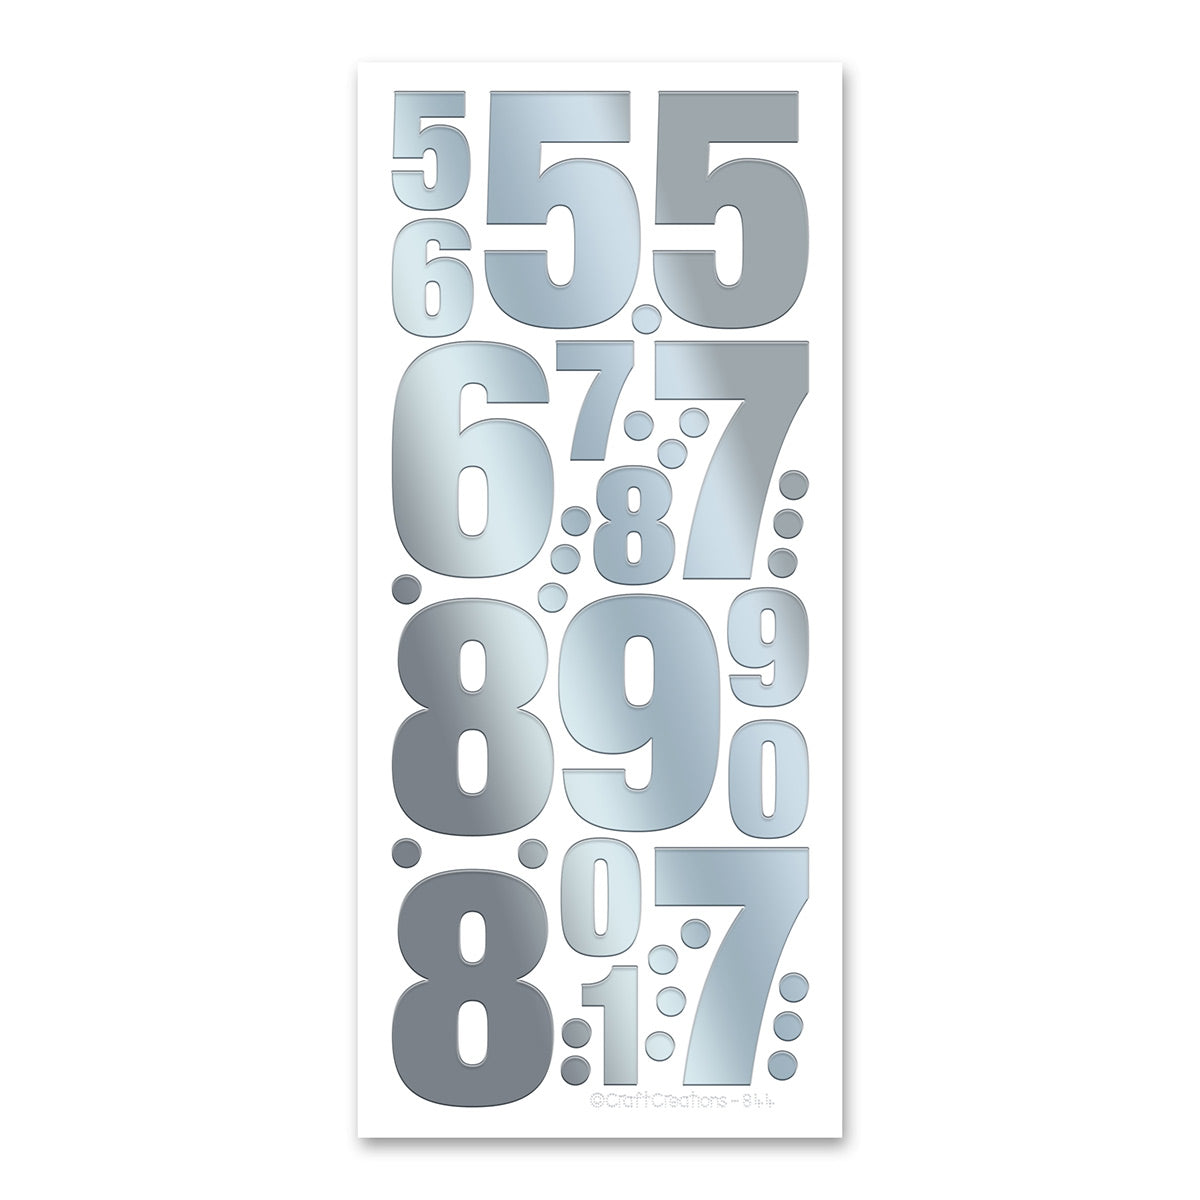 50mm + 25mm Numbers 5-9 Silver Foiled Vinyl Peel Off Stickers